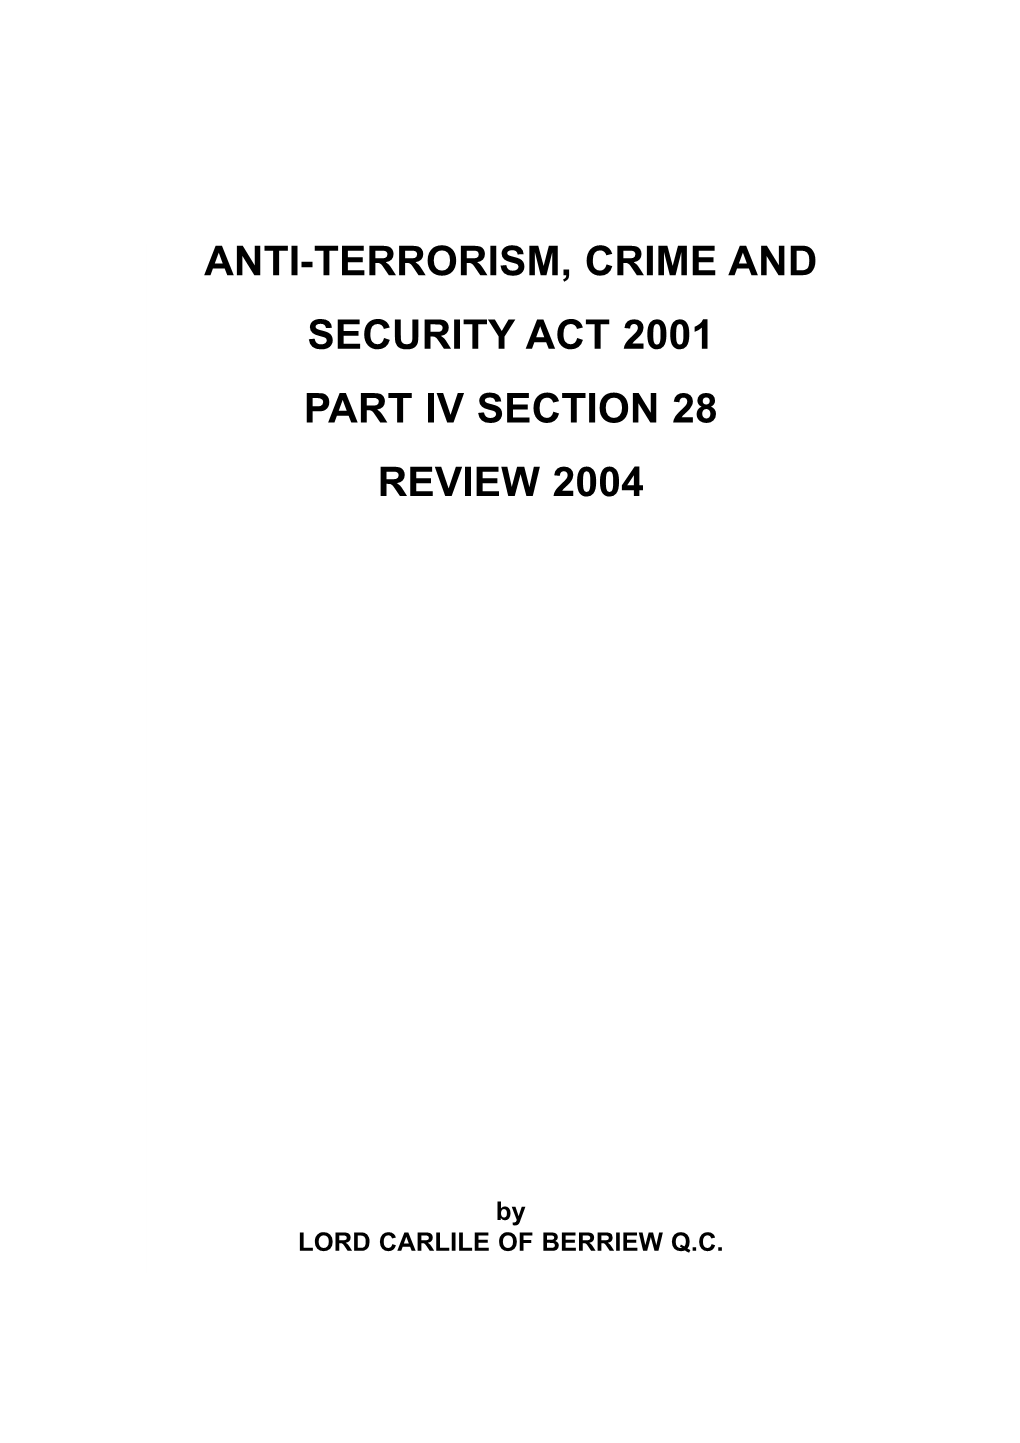 Anti-Terrorism, Crime and Security Act 2001, Part IV, Section 28